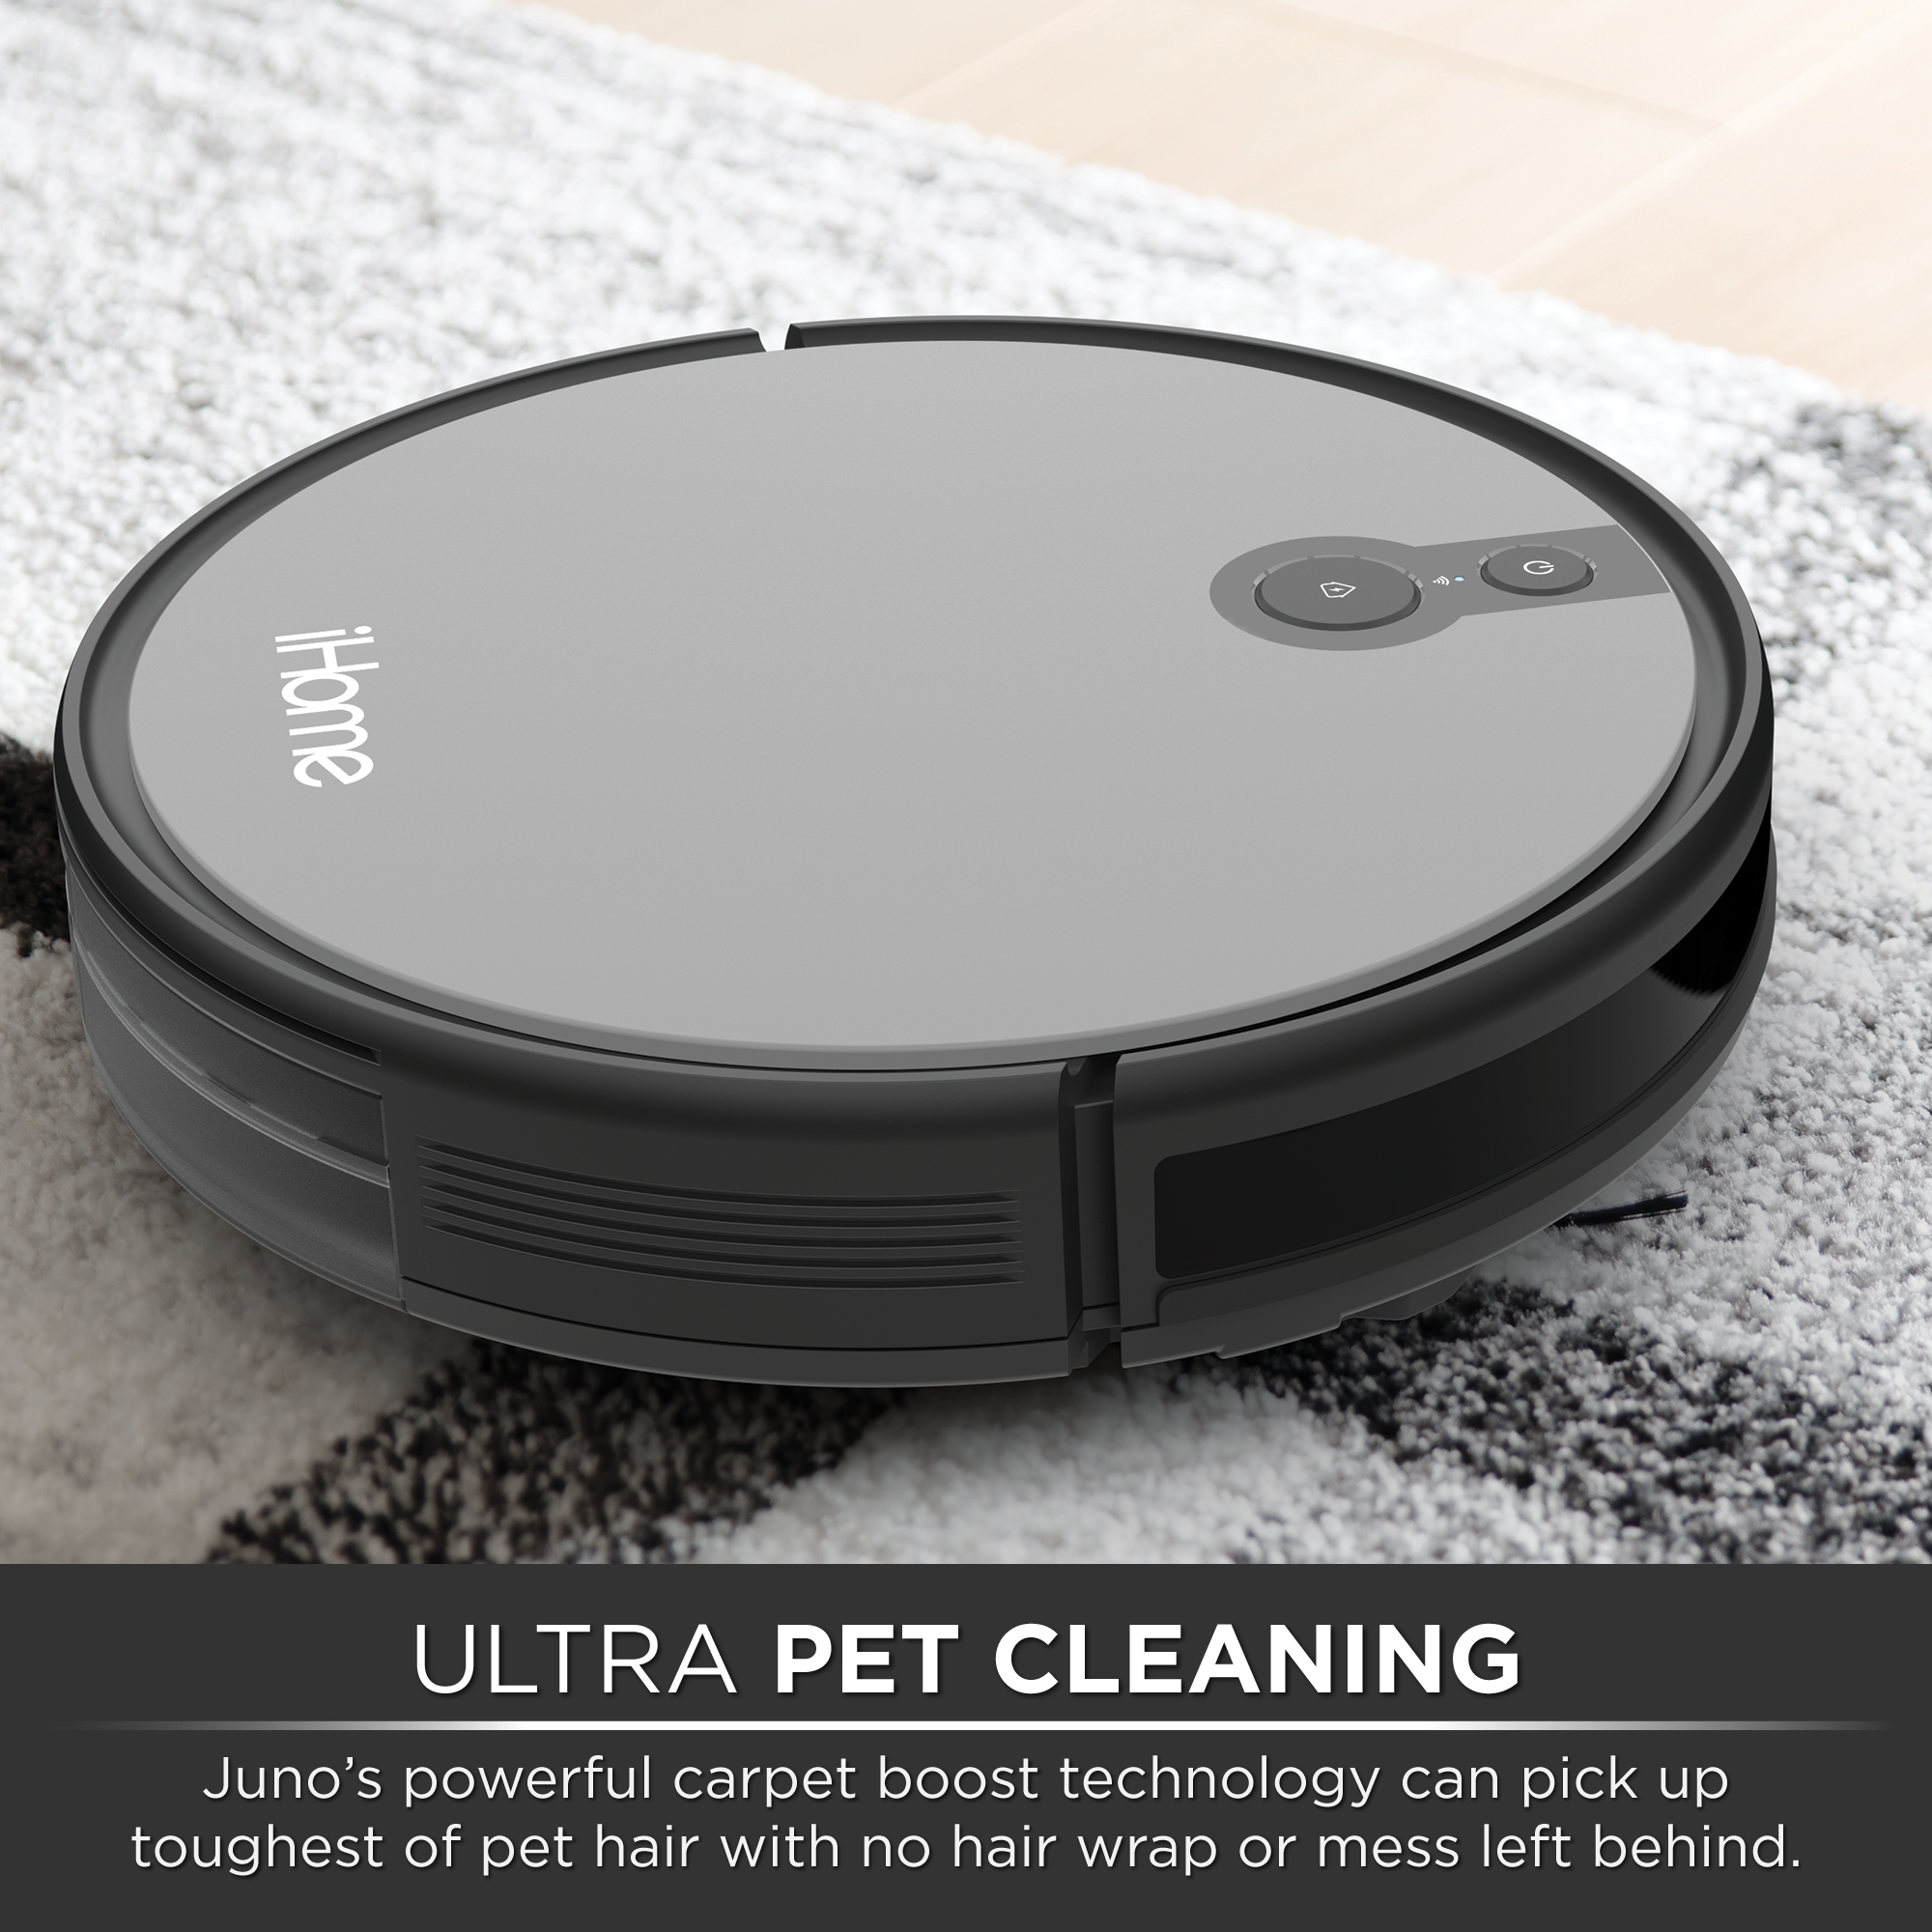 iHome AutoVac Juno Robot Vacuum, Mapping Technology, Strong Suction, 120 Min Runtime, App + Remote Control, New - image 7 of 11